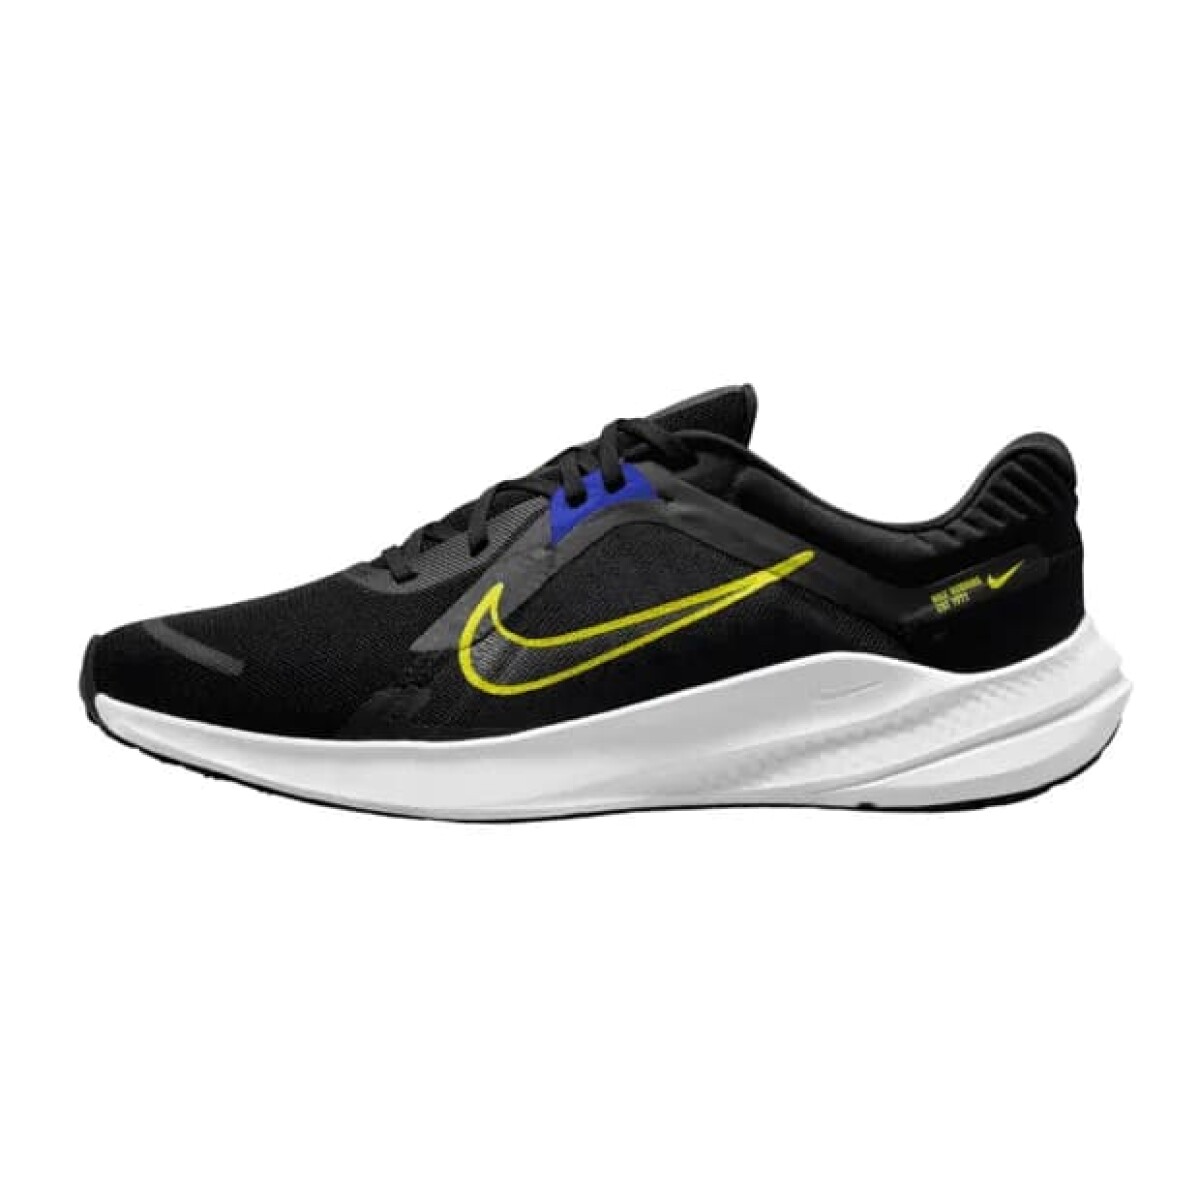 Champion Nike Running Hombre Quest 5 Black/Hgh - S/C 